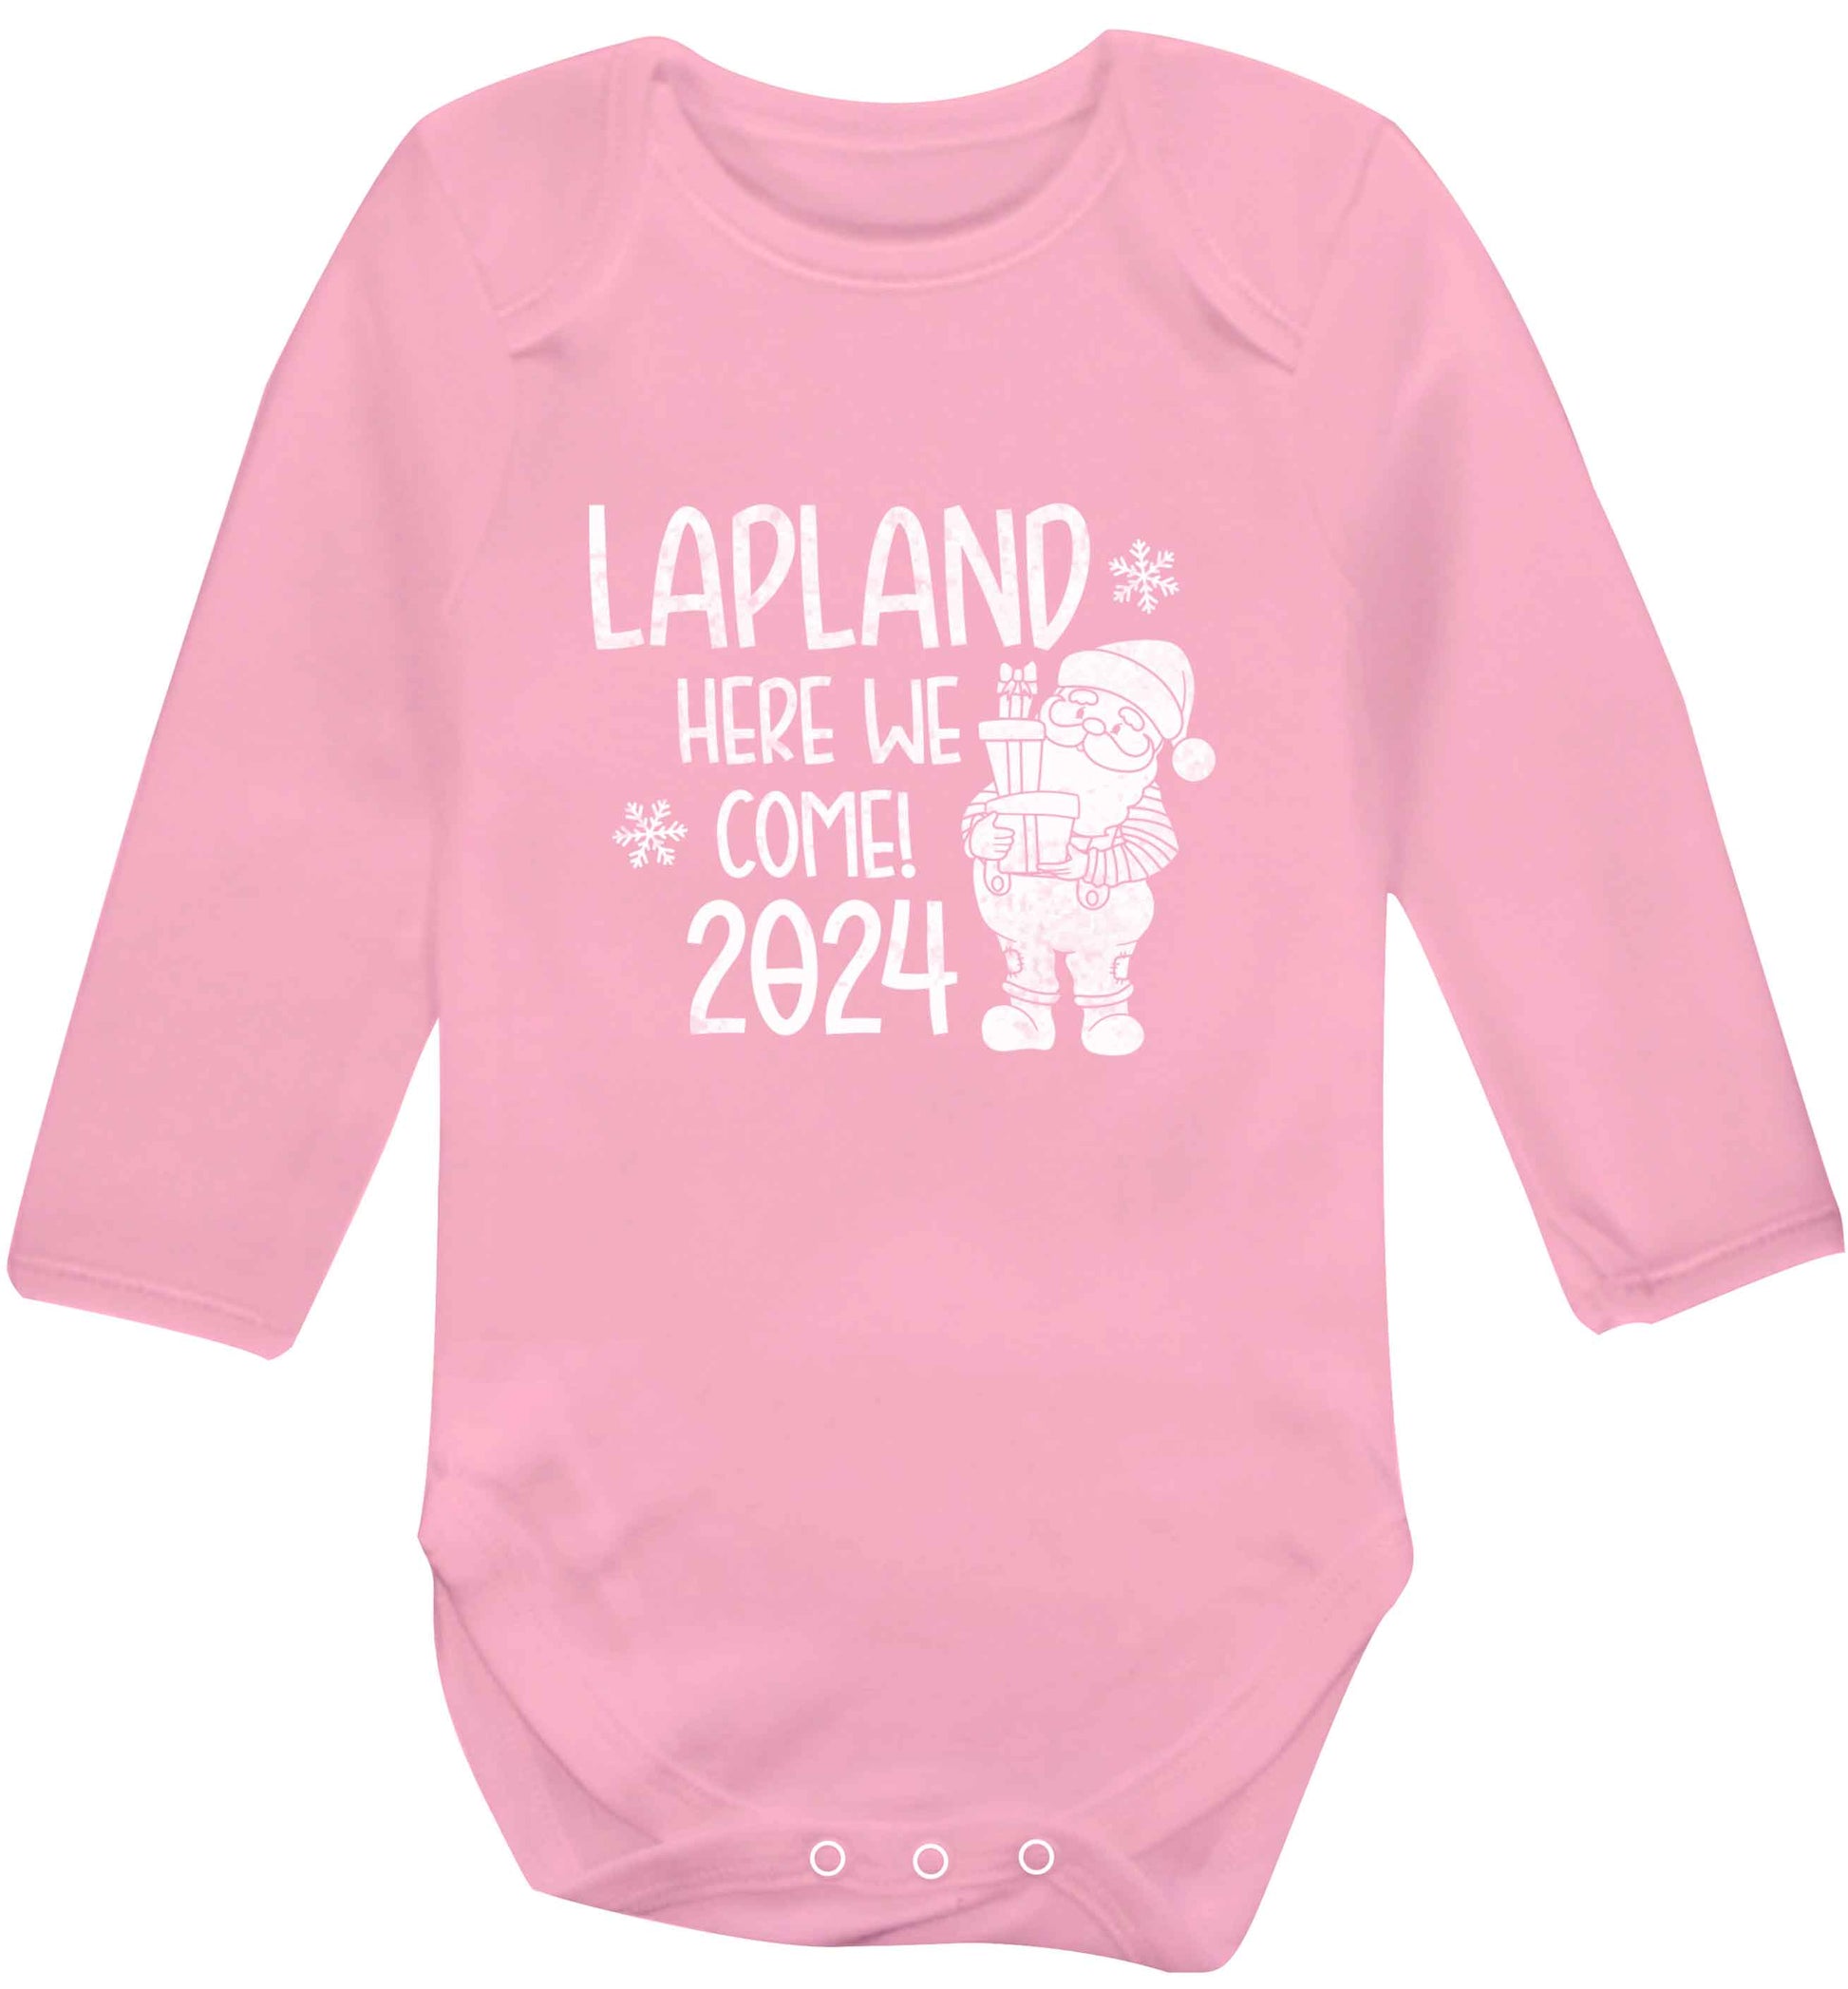 Lapland here we come baby vest long sleeved pale pink 6-12 months